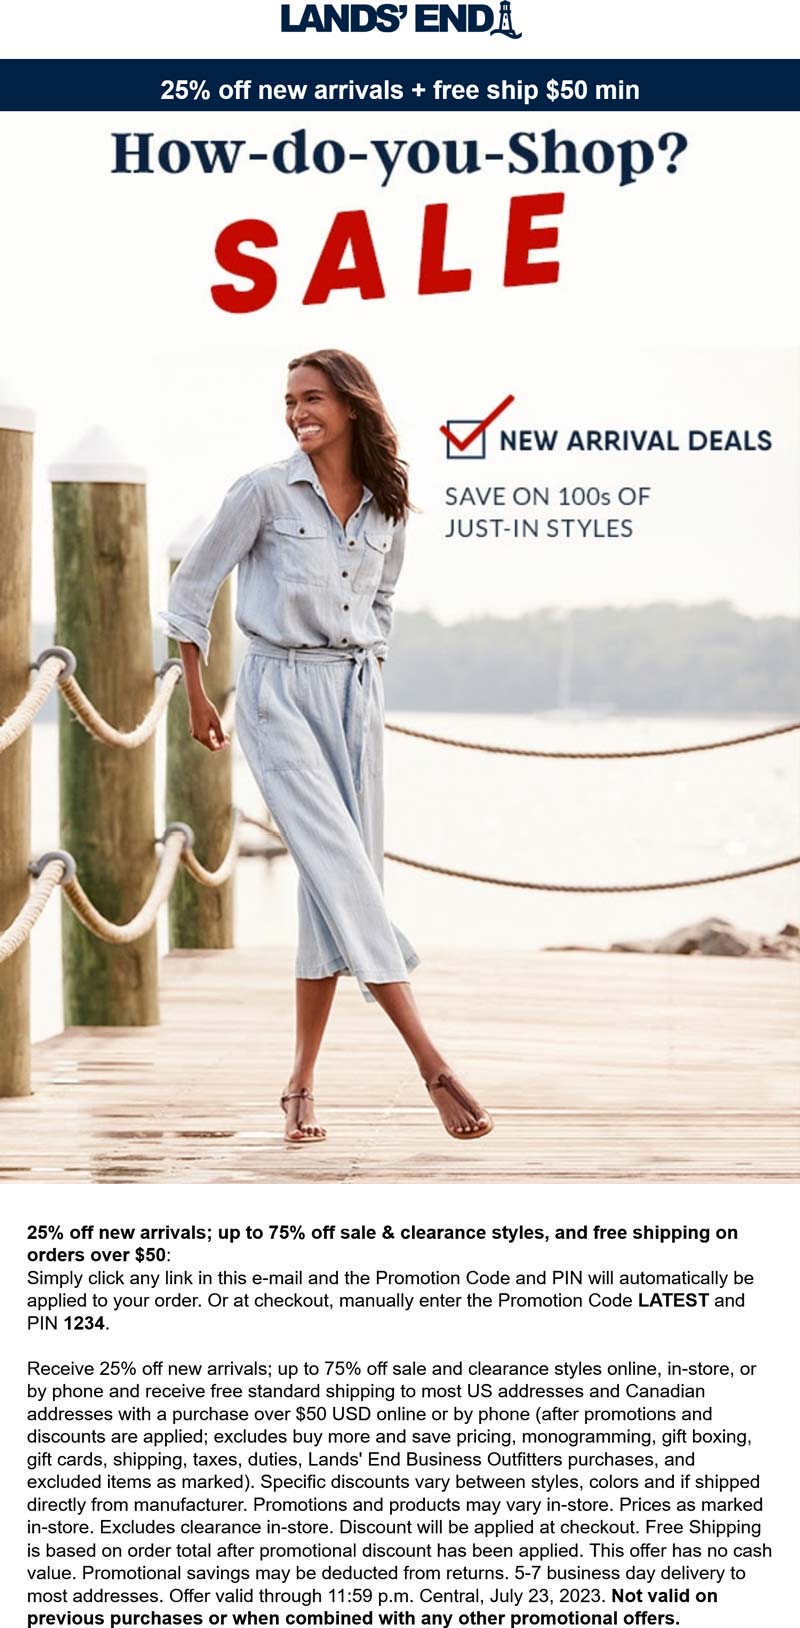 Lands End stores Coupon  25% off new arrivals at Lands End via promo code LATEST and pin 1234 #landsend 